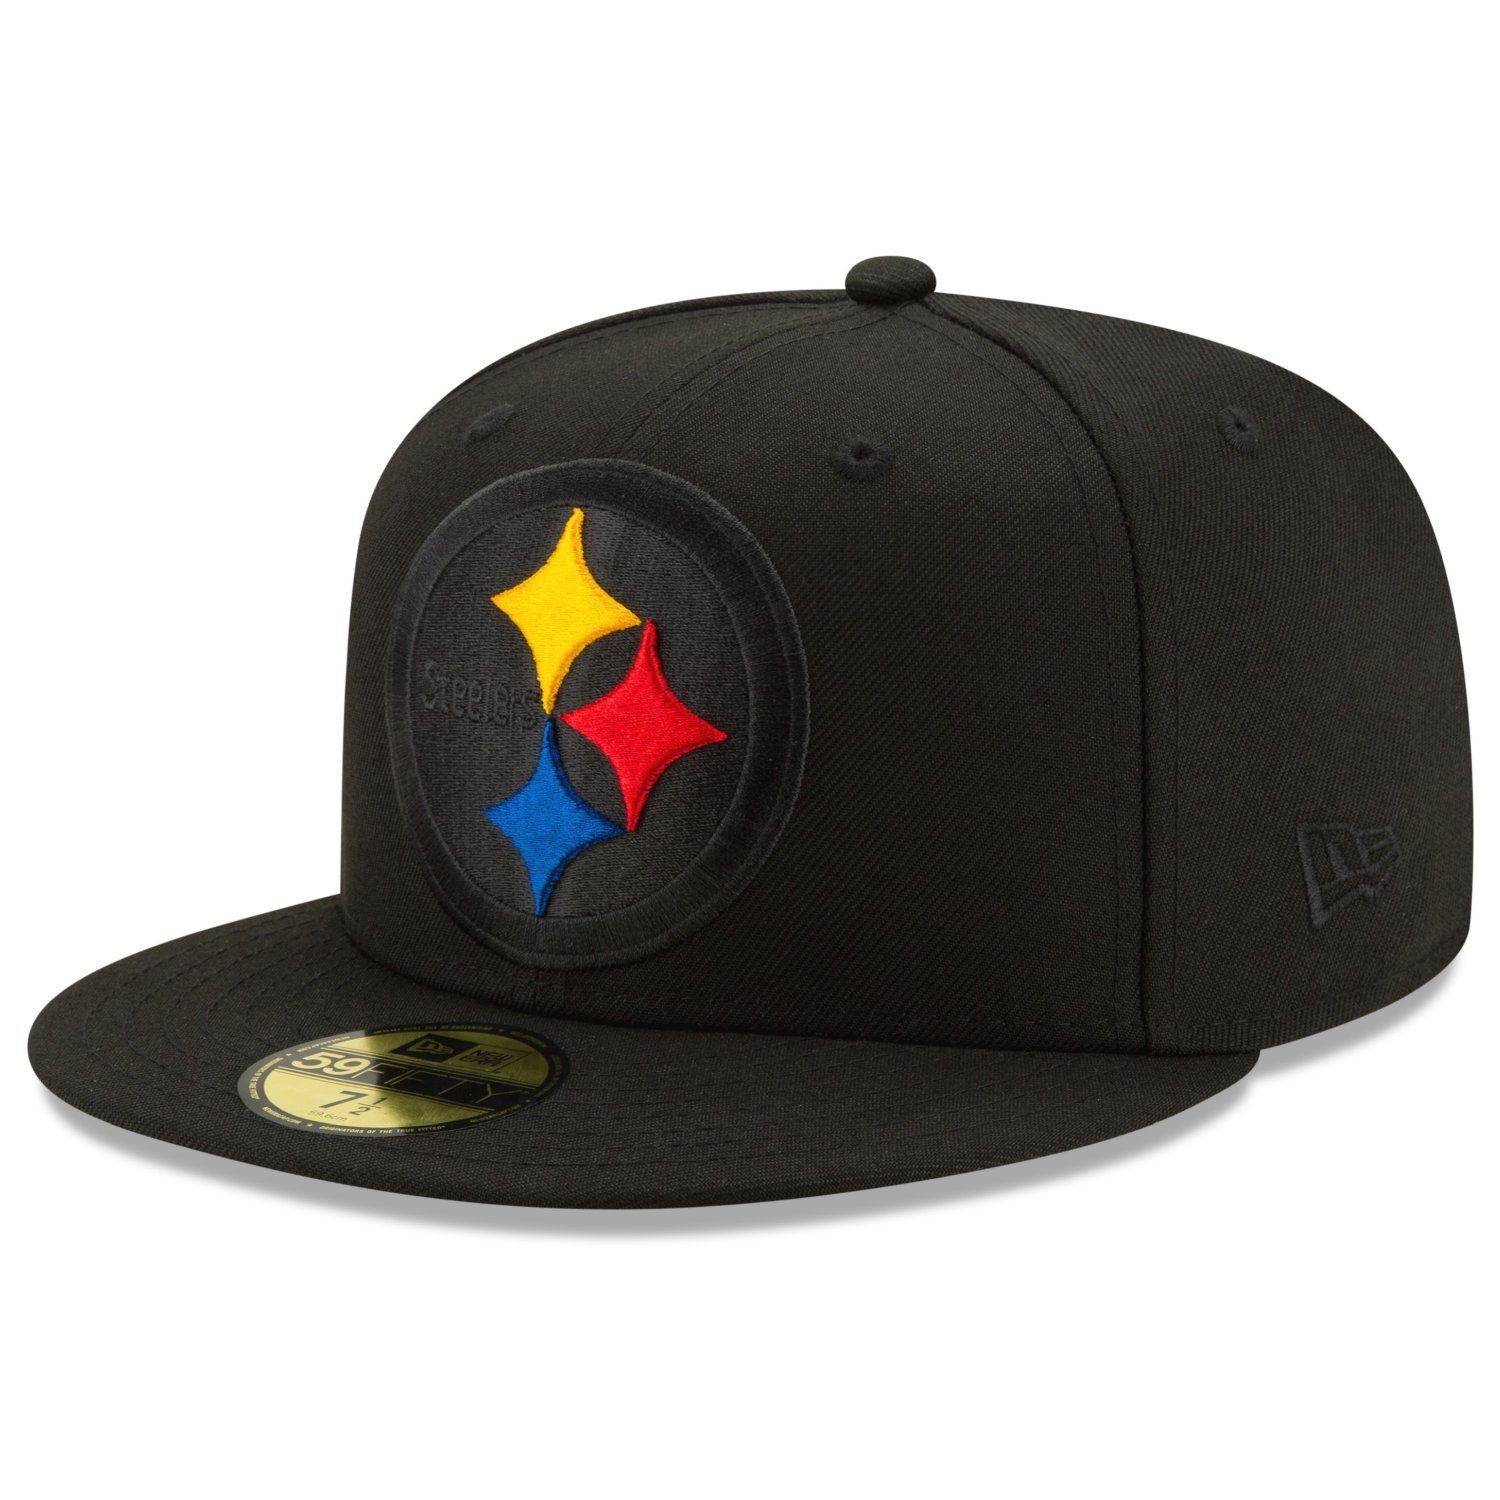 ELEMENTS Era NFL 2.0 59Fifty Fitted New Pittsburgh Steelers Cap